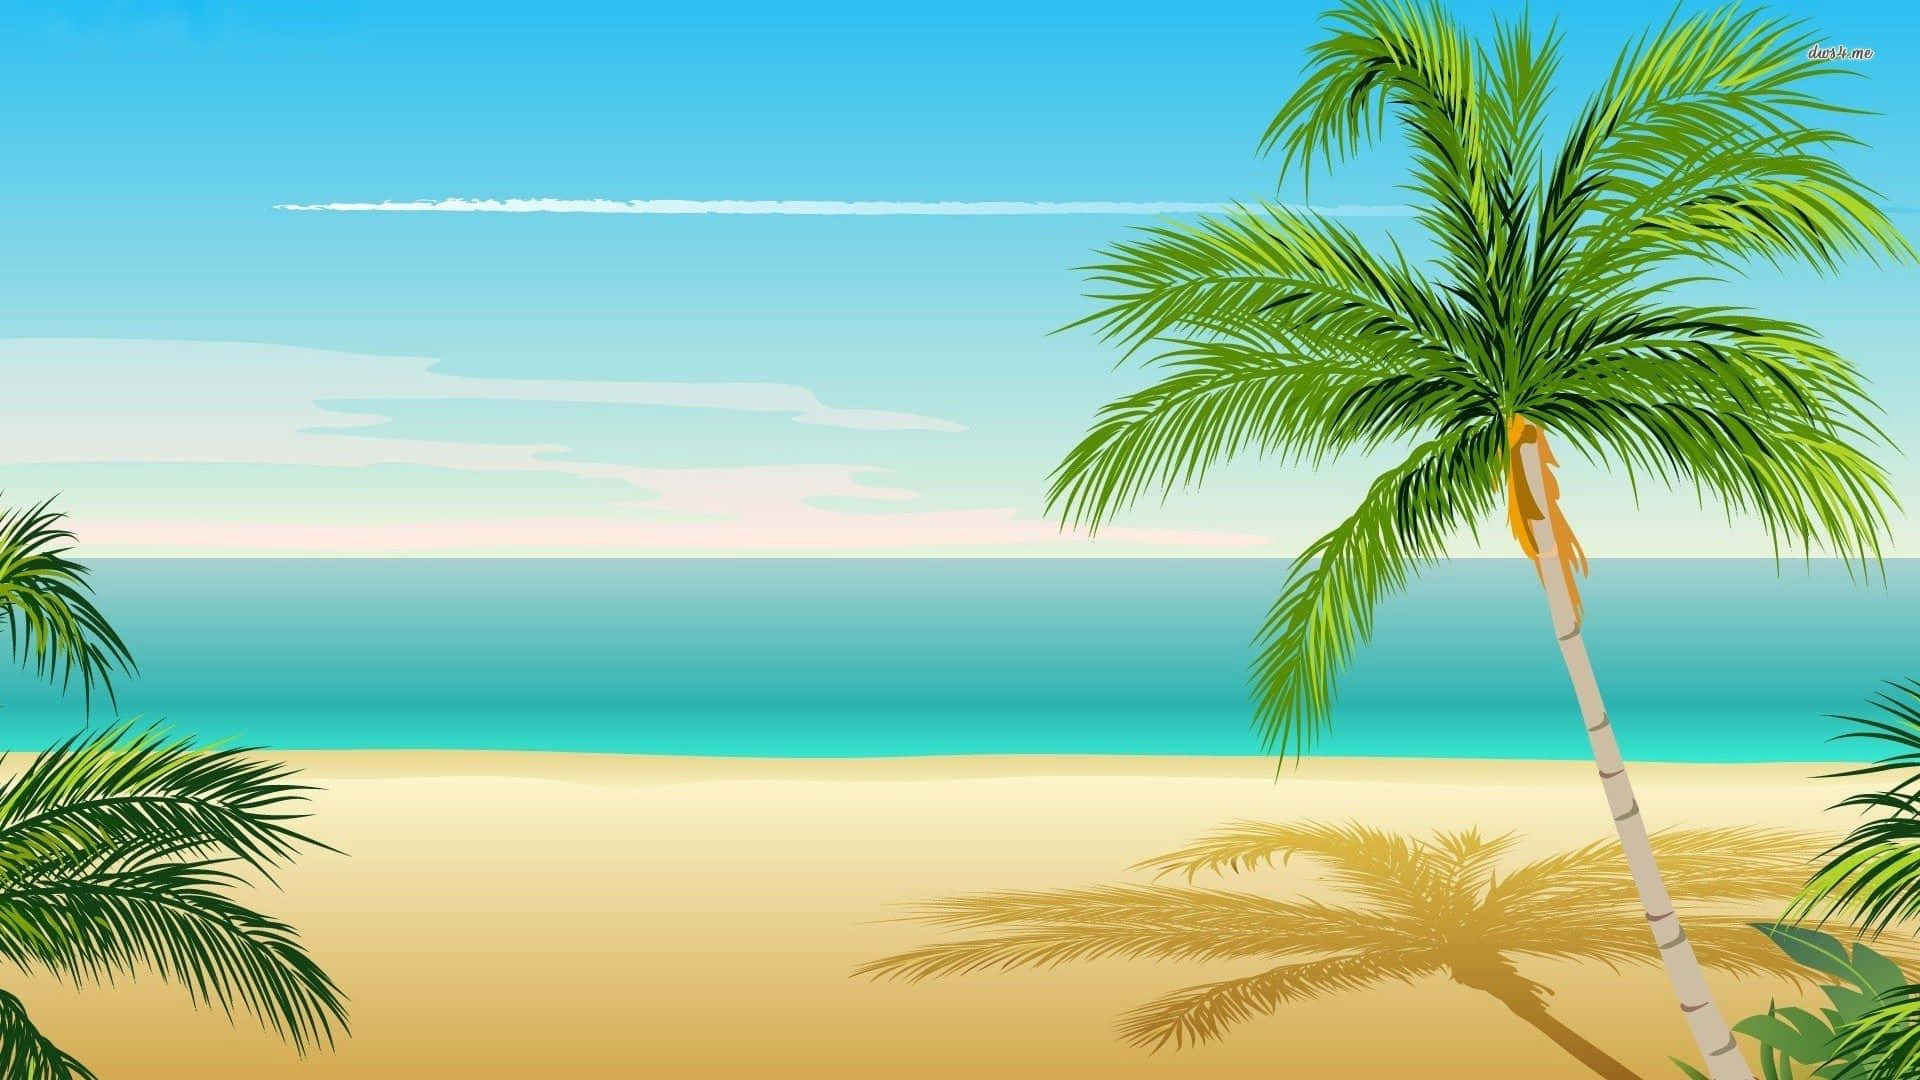 Download Peaceful Desktop Background with Palm Tree Wallpaper ...